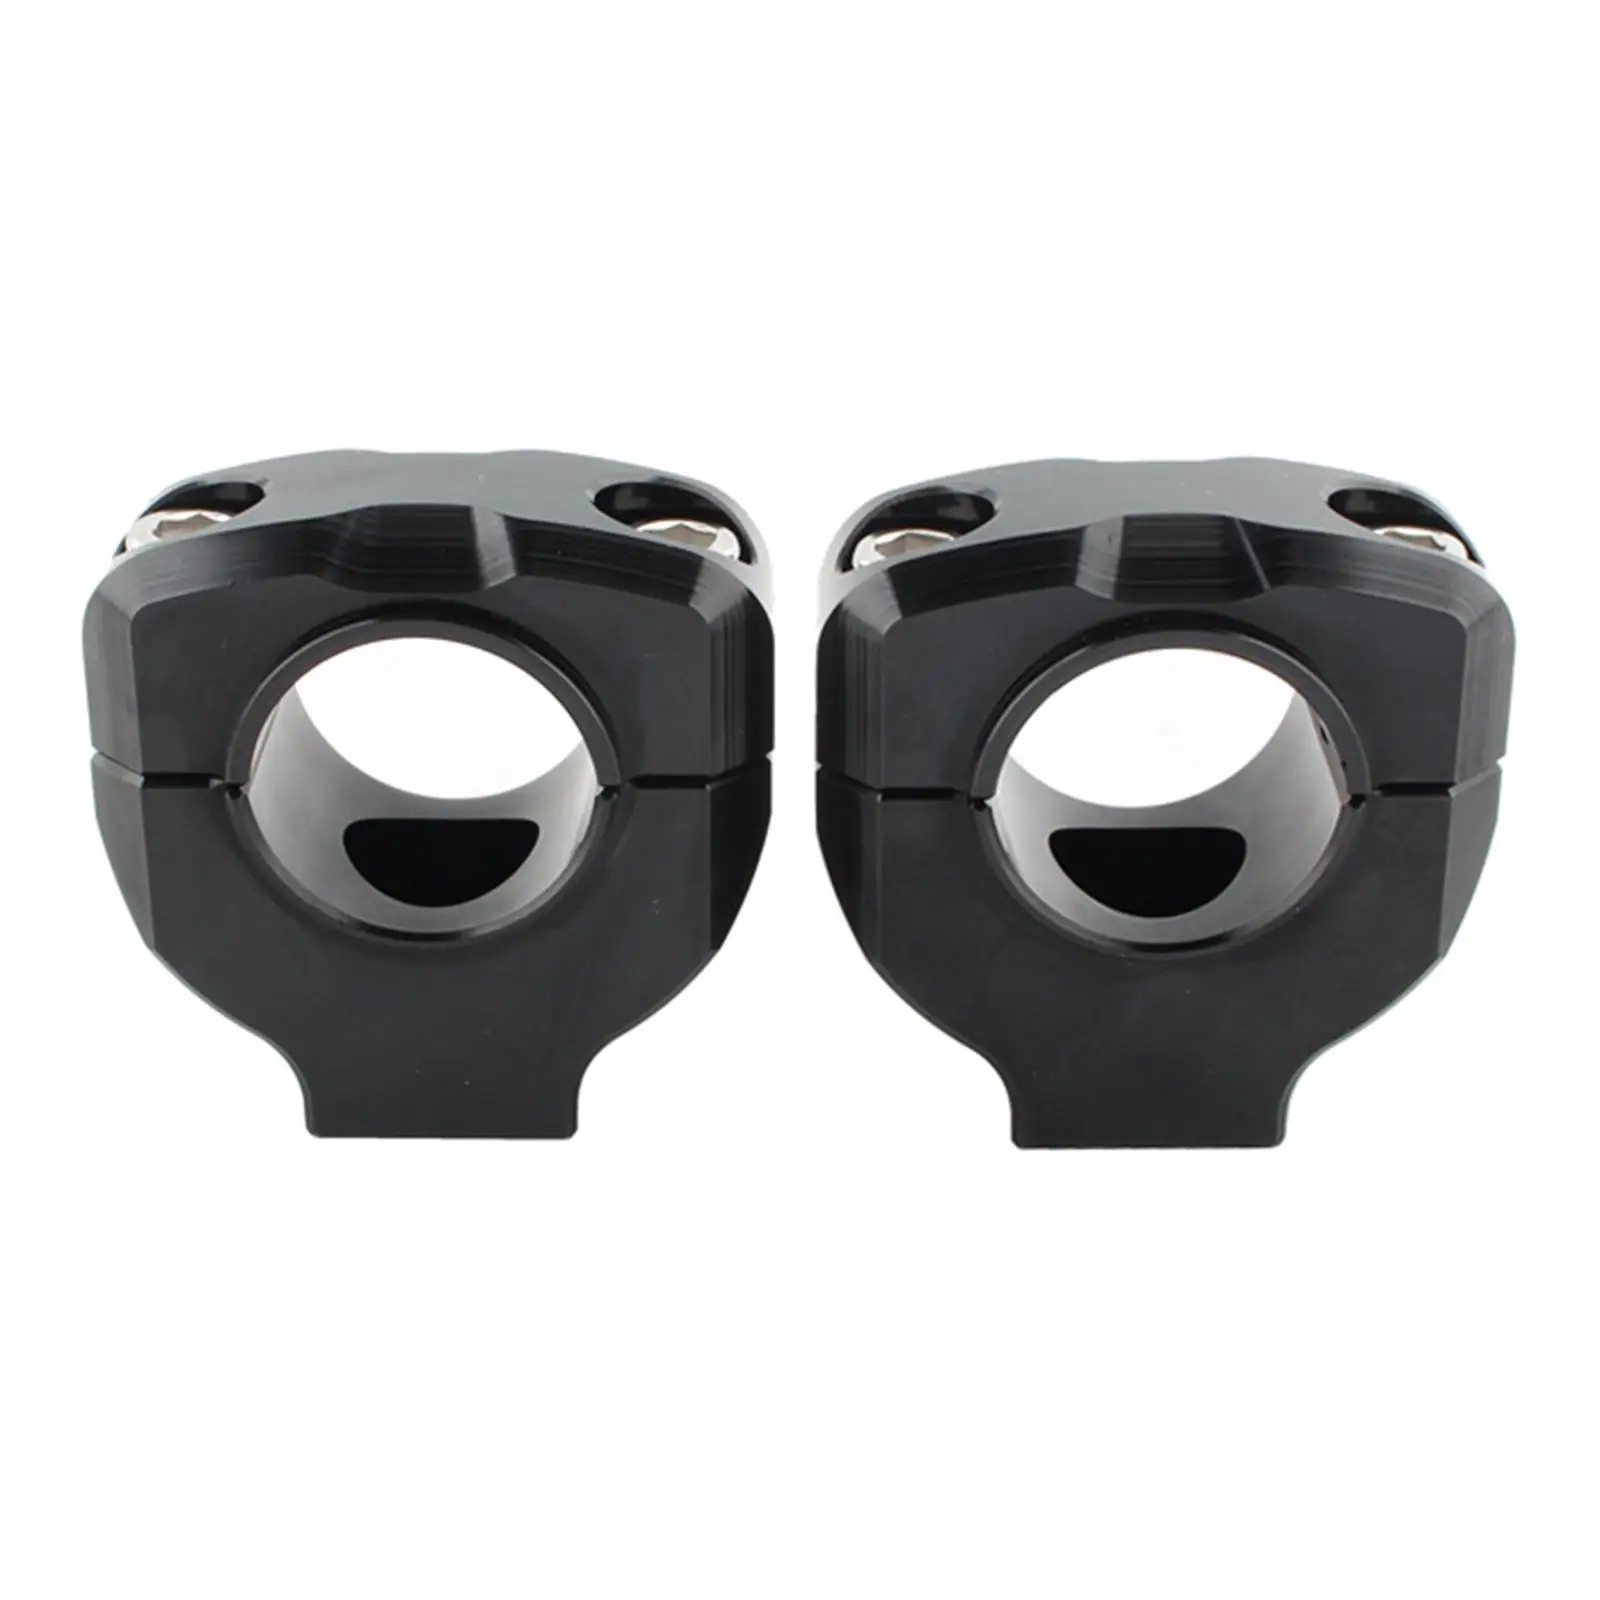 1 pair of universal motorcycle 28mm 1/8 inch handlebar riser clamp   Lifter - £16.90 GBP